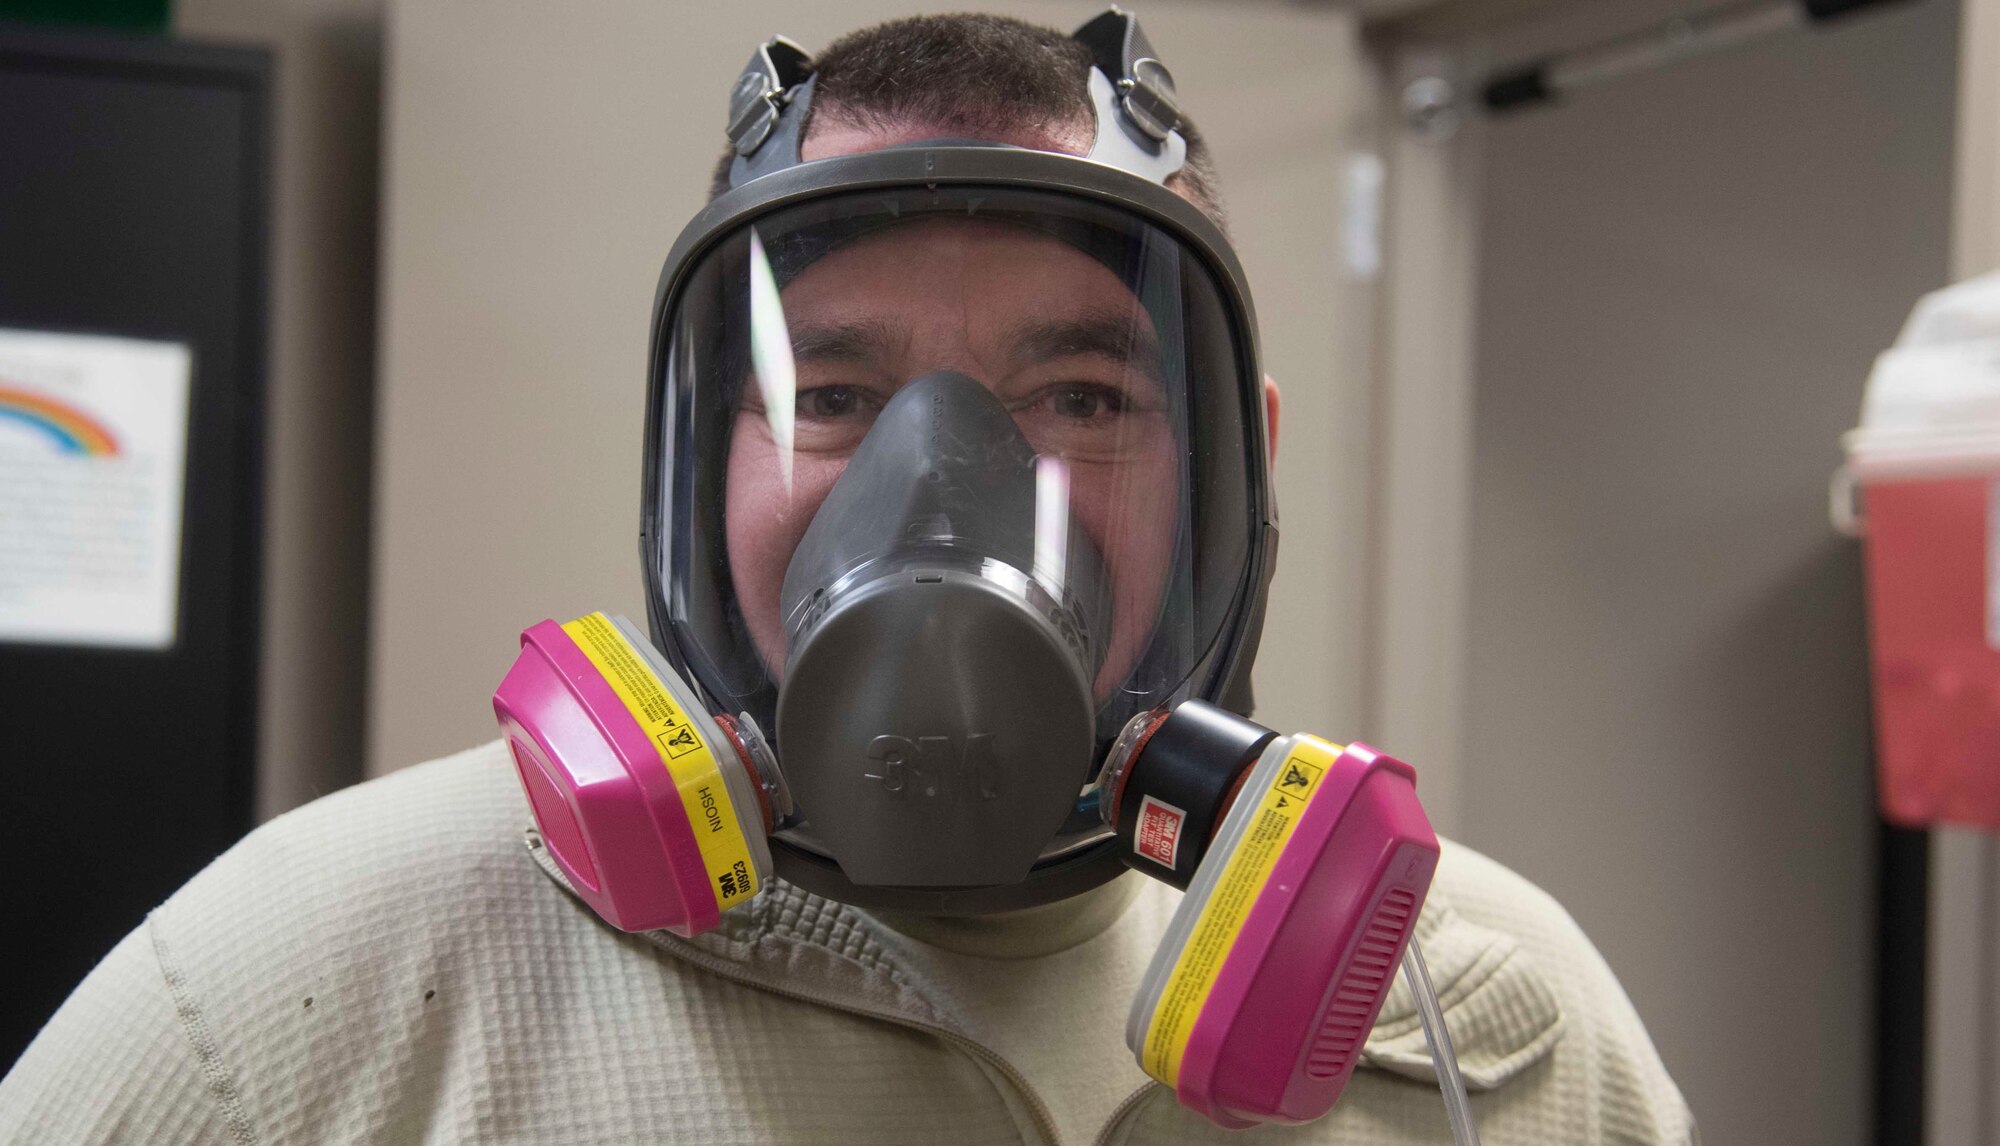 Staff Sgt. Nathan Gilbert, 141st Maintenance Squadron metals technician, participates in a respirator mask fit test Dec. 7, 2016 at Fairchild Air Force Base, Washington. Gilbert completed the respirator fit test as part of requirements for accomplishing his duties as a metals technician. (U.S. Air Force photo/Senior Airman Nick J. Daniello)